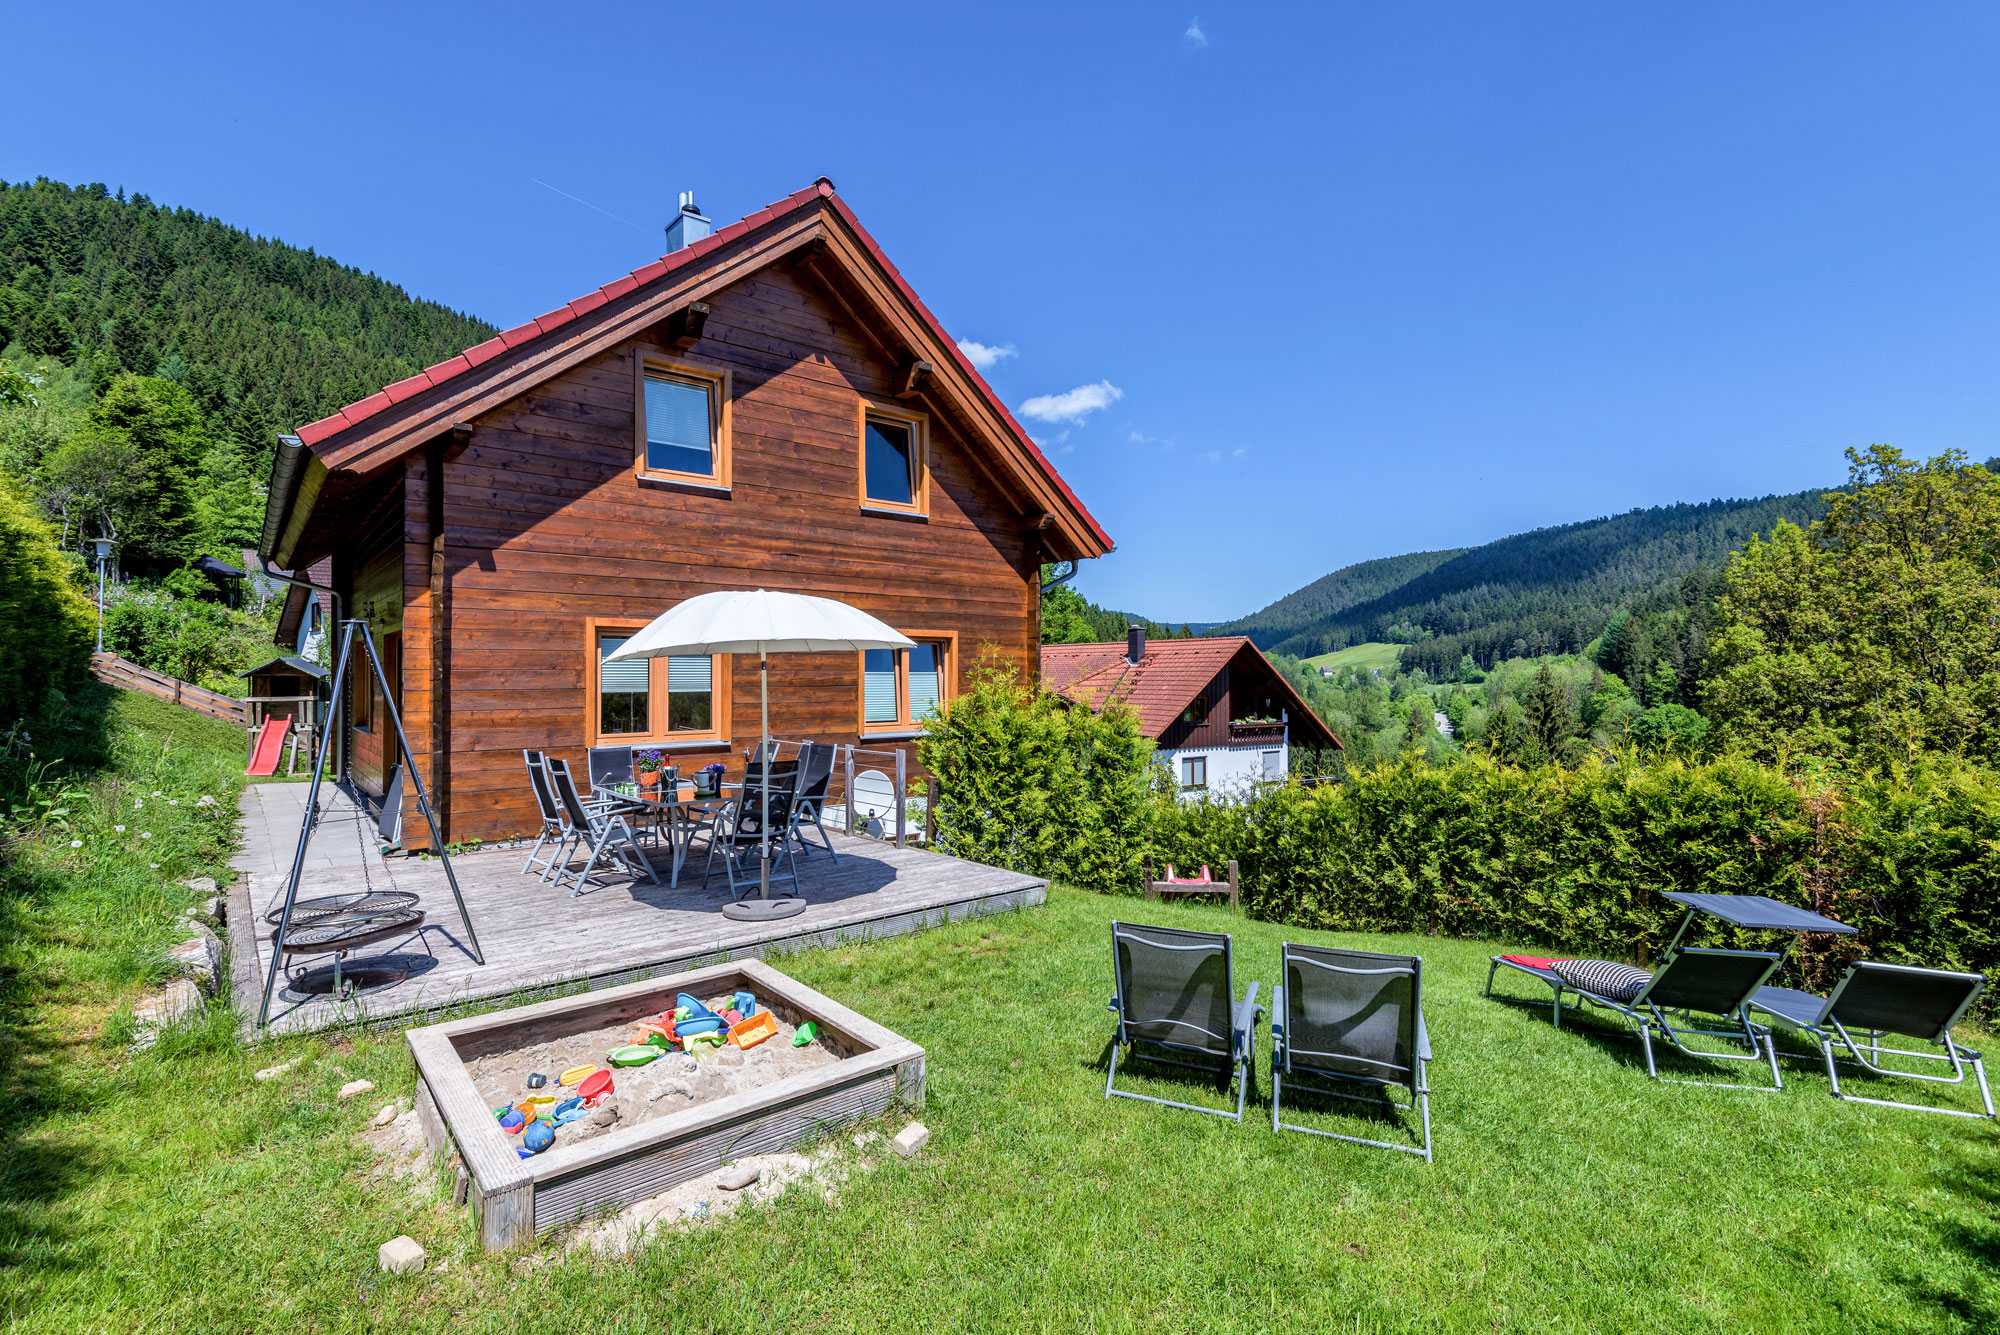 Vacation in the Black Forest - last minute vacation